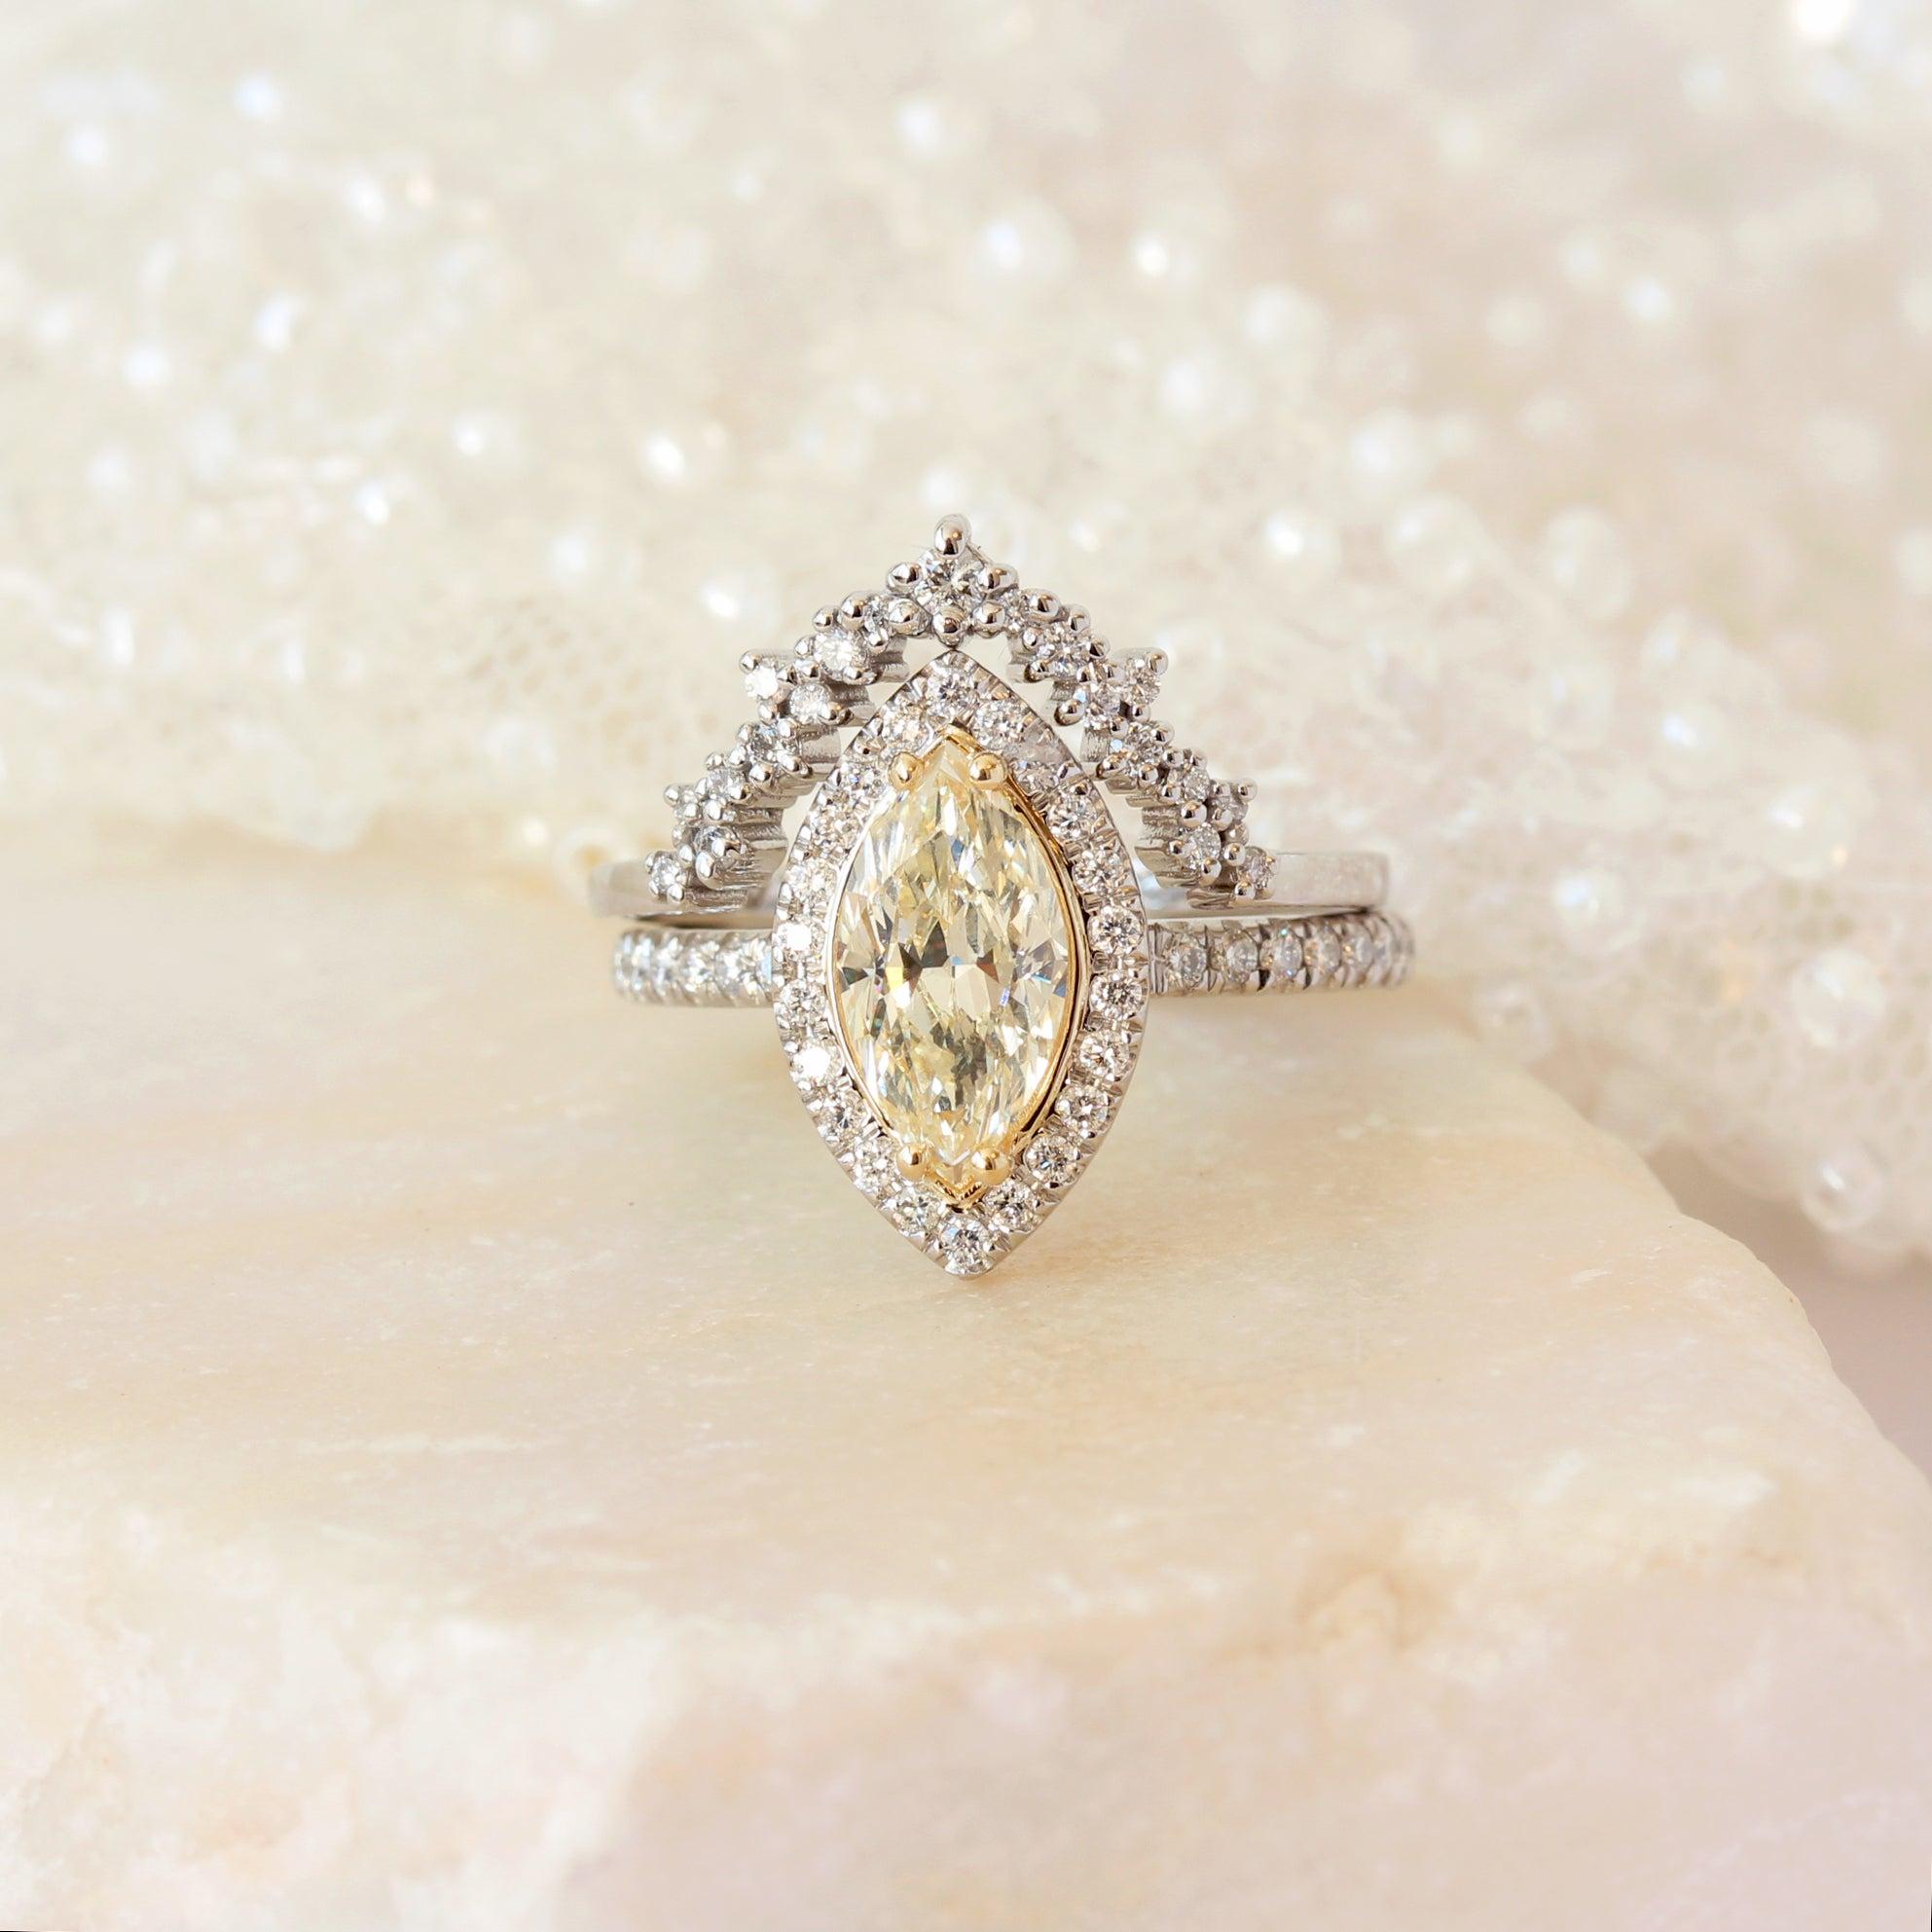 Marquise Yellow Halo Diamond Engagement ring and Diamond Nesting band - Daisy & Stardust.
This list is for two ring set.
Handmade with care. 
An original design by Silly Shiny Diamonds. 

Details: 
* Center Stone Shape: Marquise cut.
* Center Stone